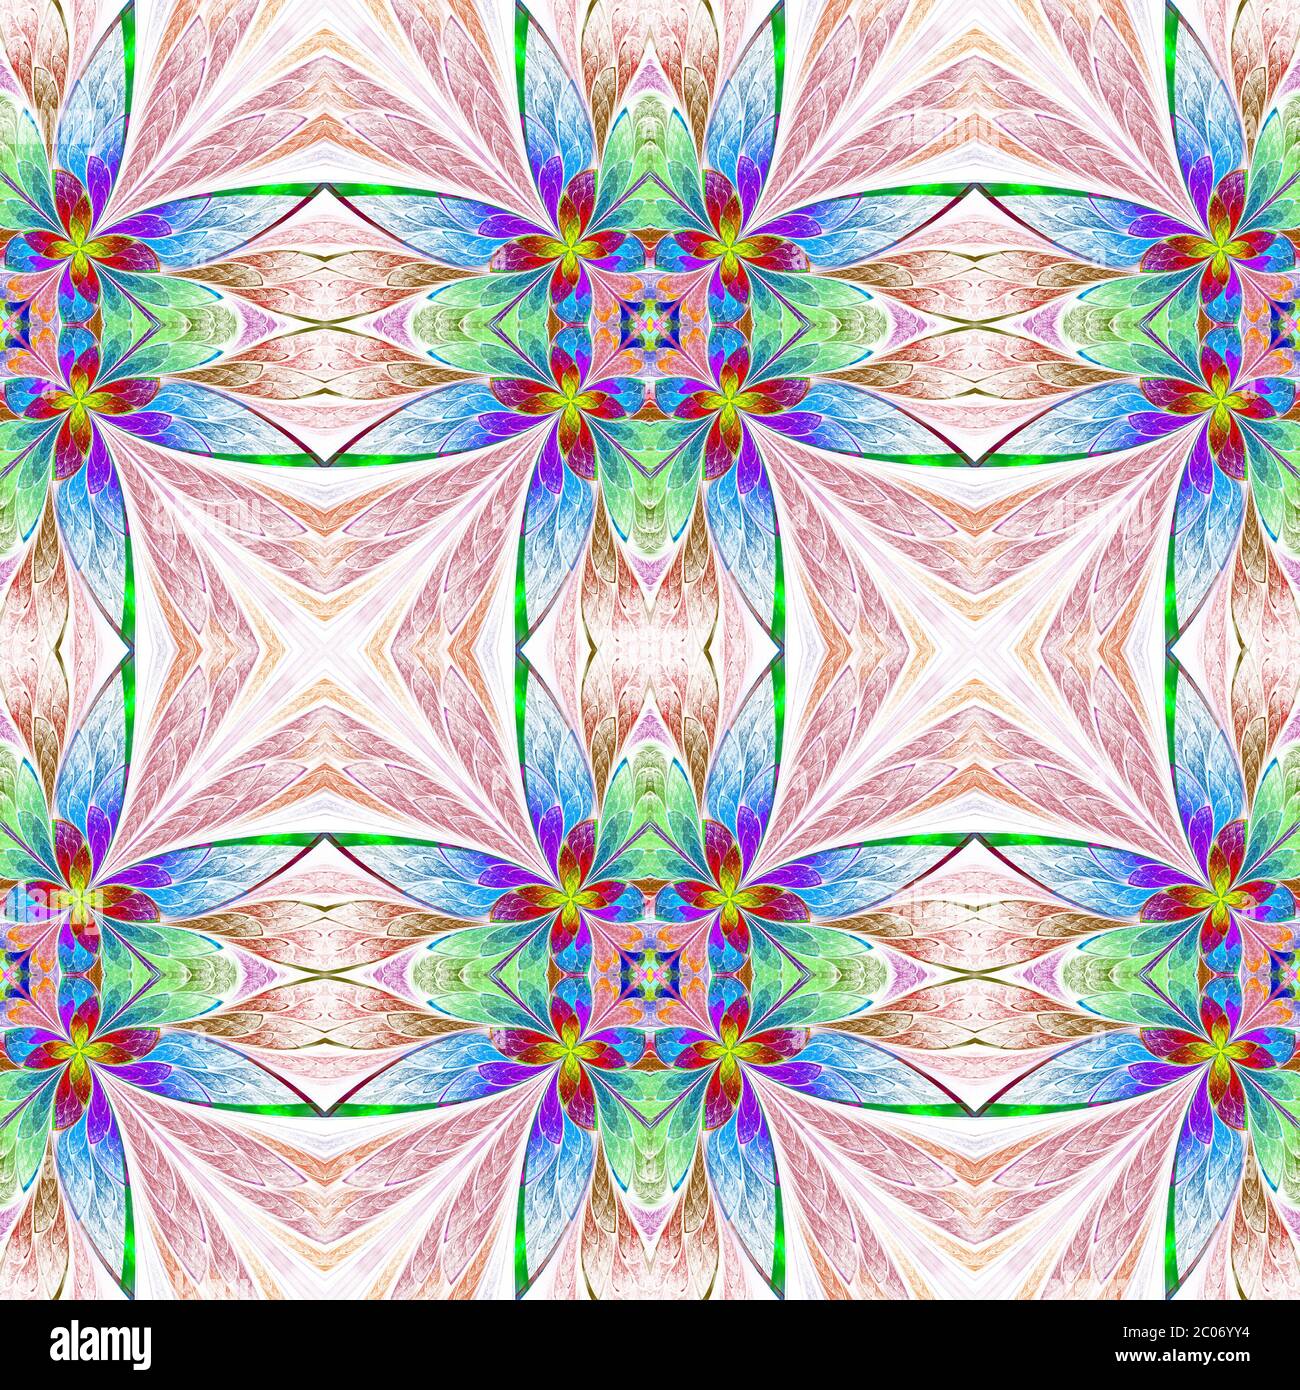 Symmetrical multicolored flower pattern in stained-glass window style on light.  Computer generated graphics. Stock Photo